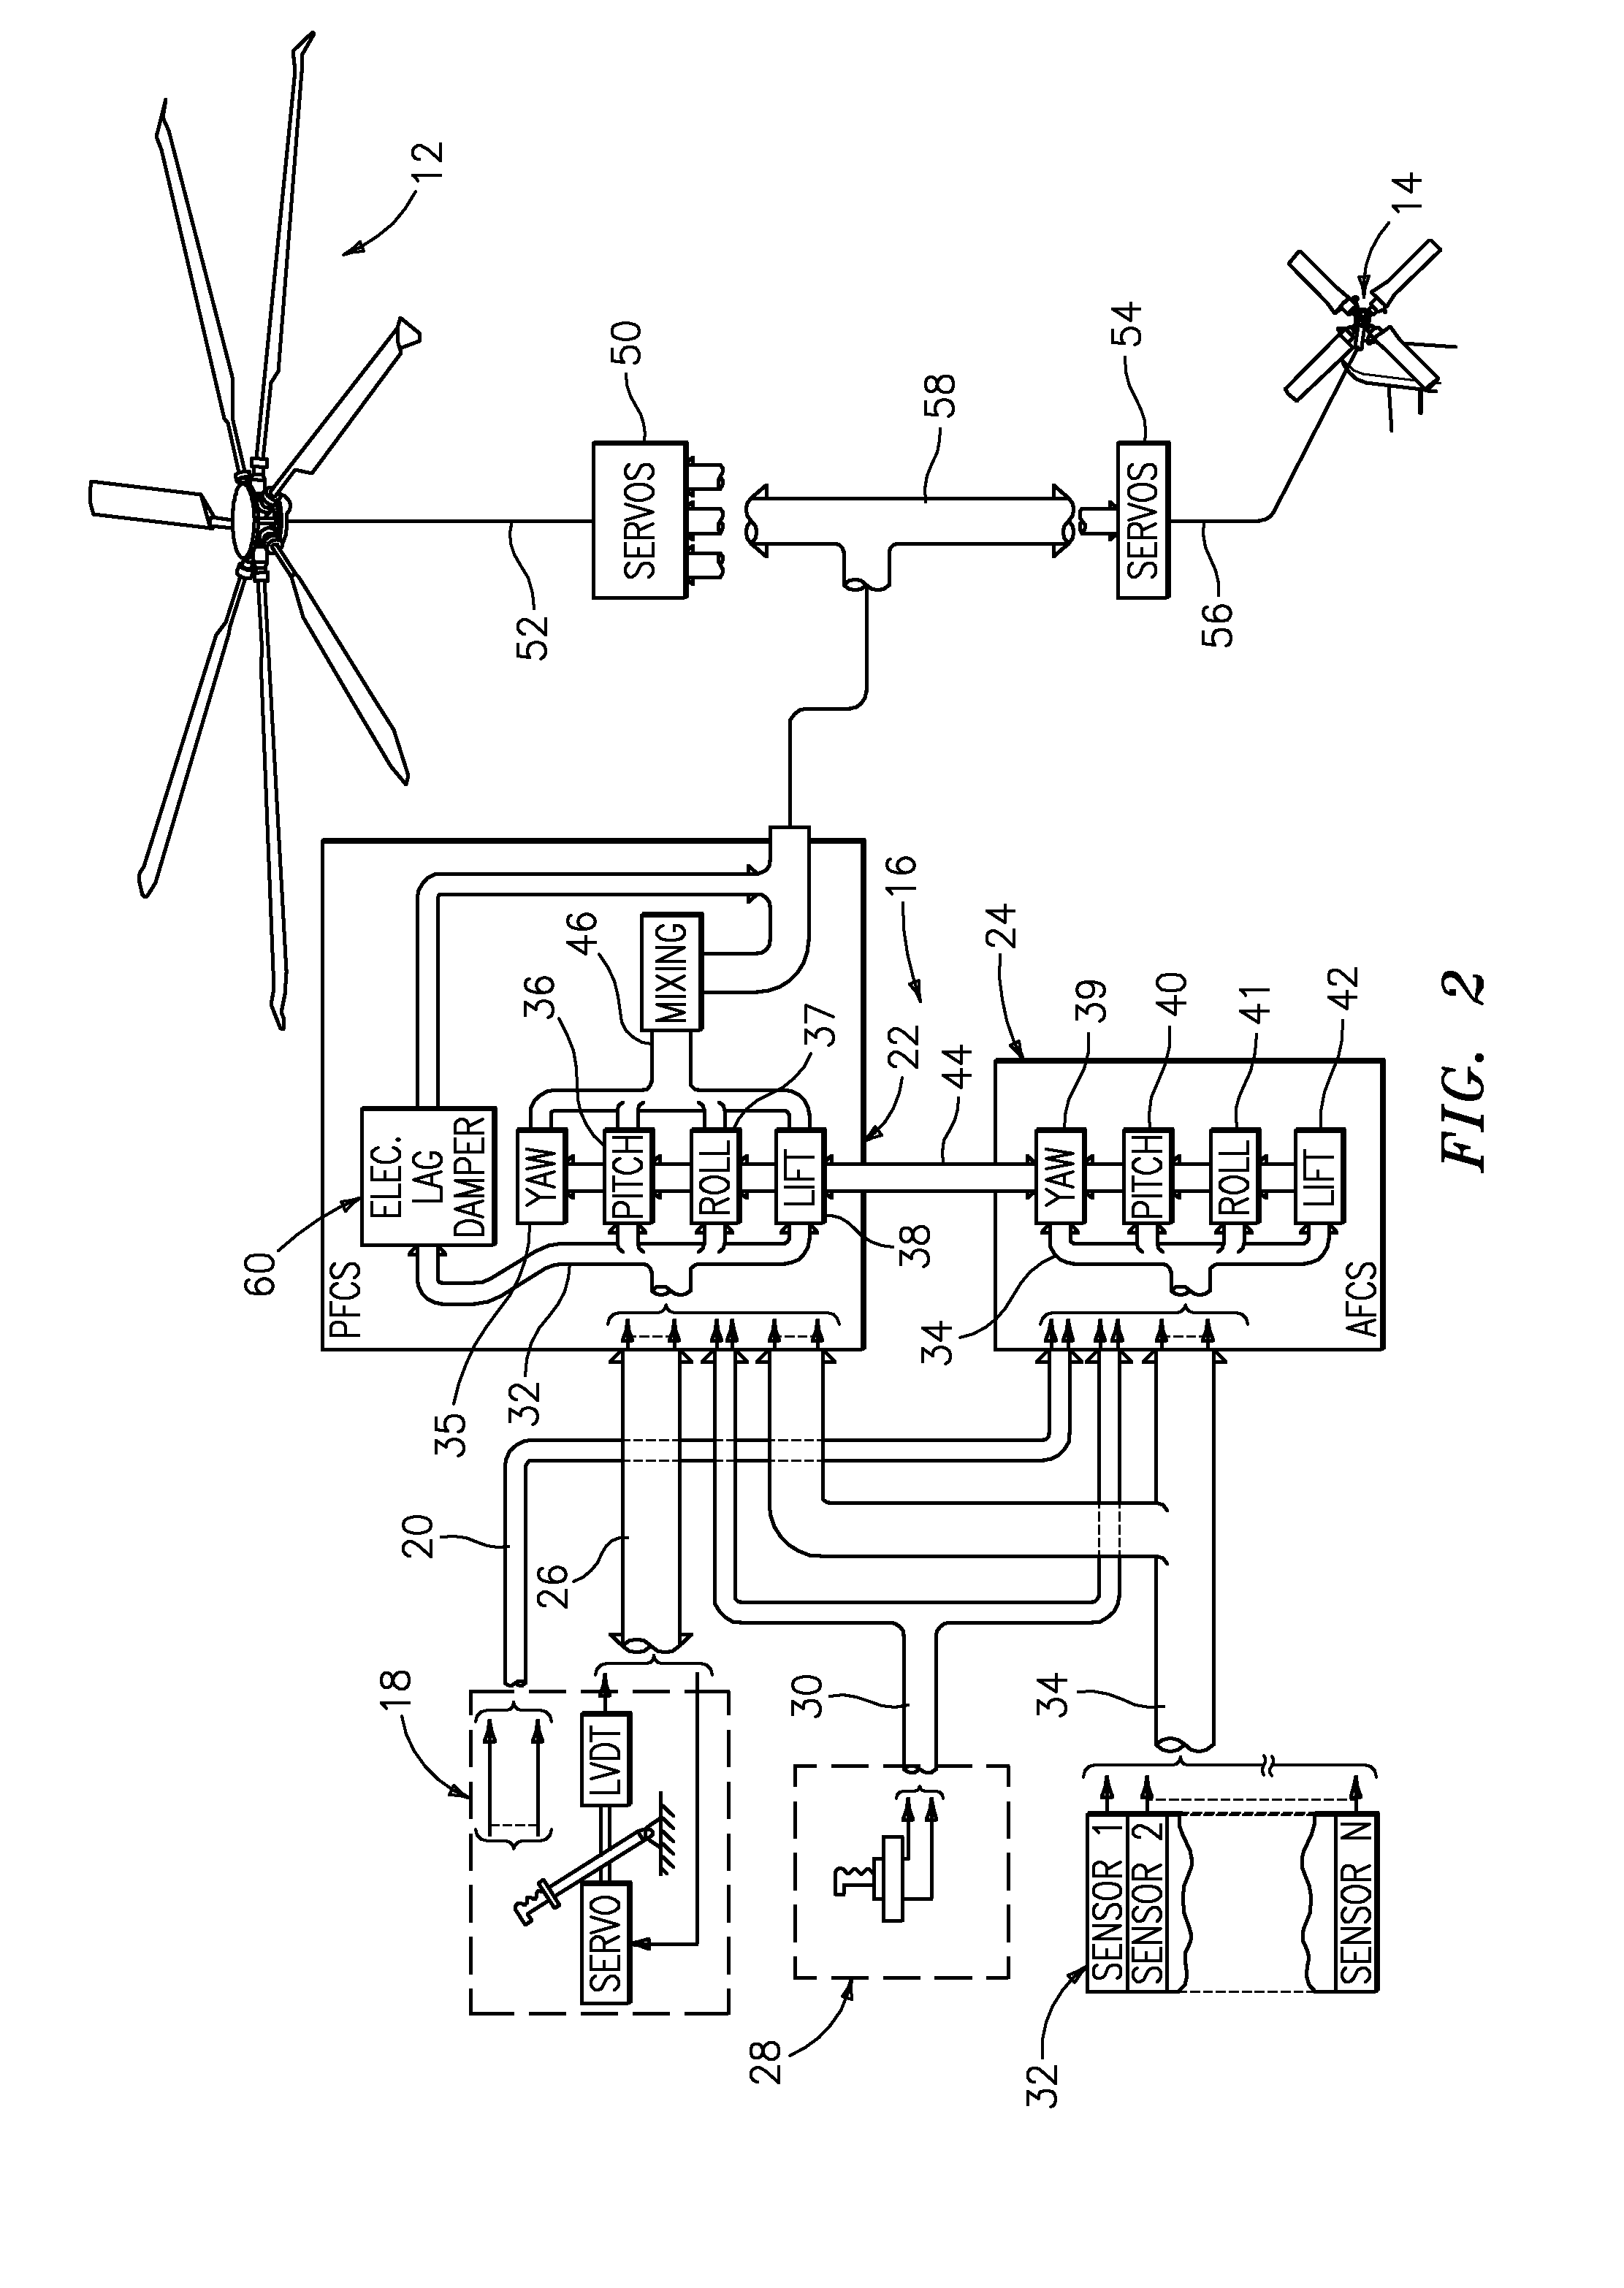 Fly-by-wire flight control system with electronic lead/lag damper algorithm